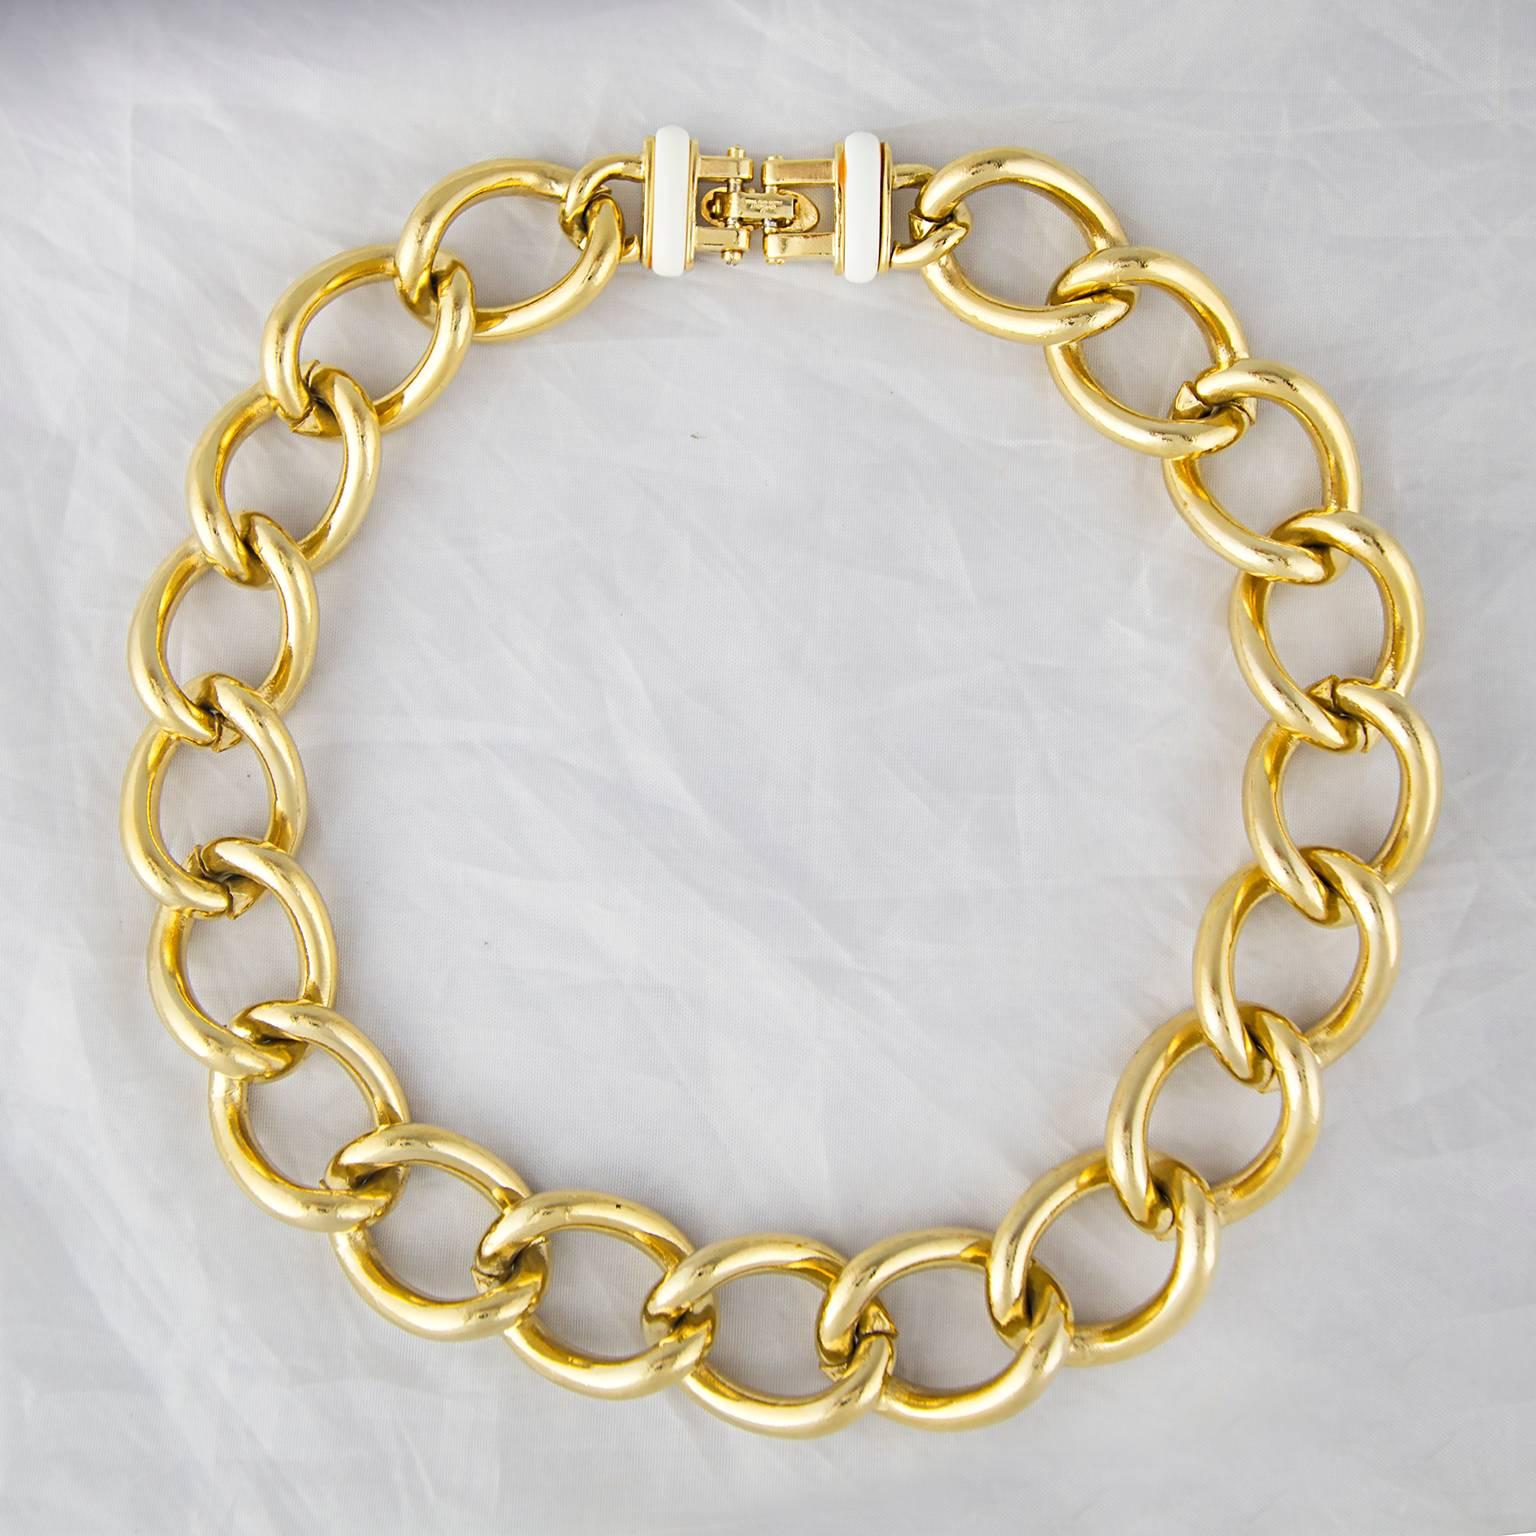 Givenchy Statement Chain Necklace In Excellent Condition For Sale In London, GB